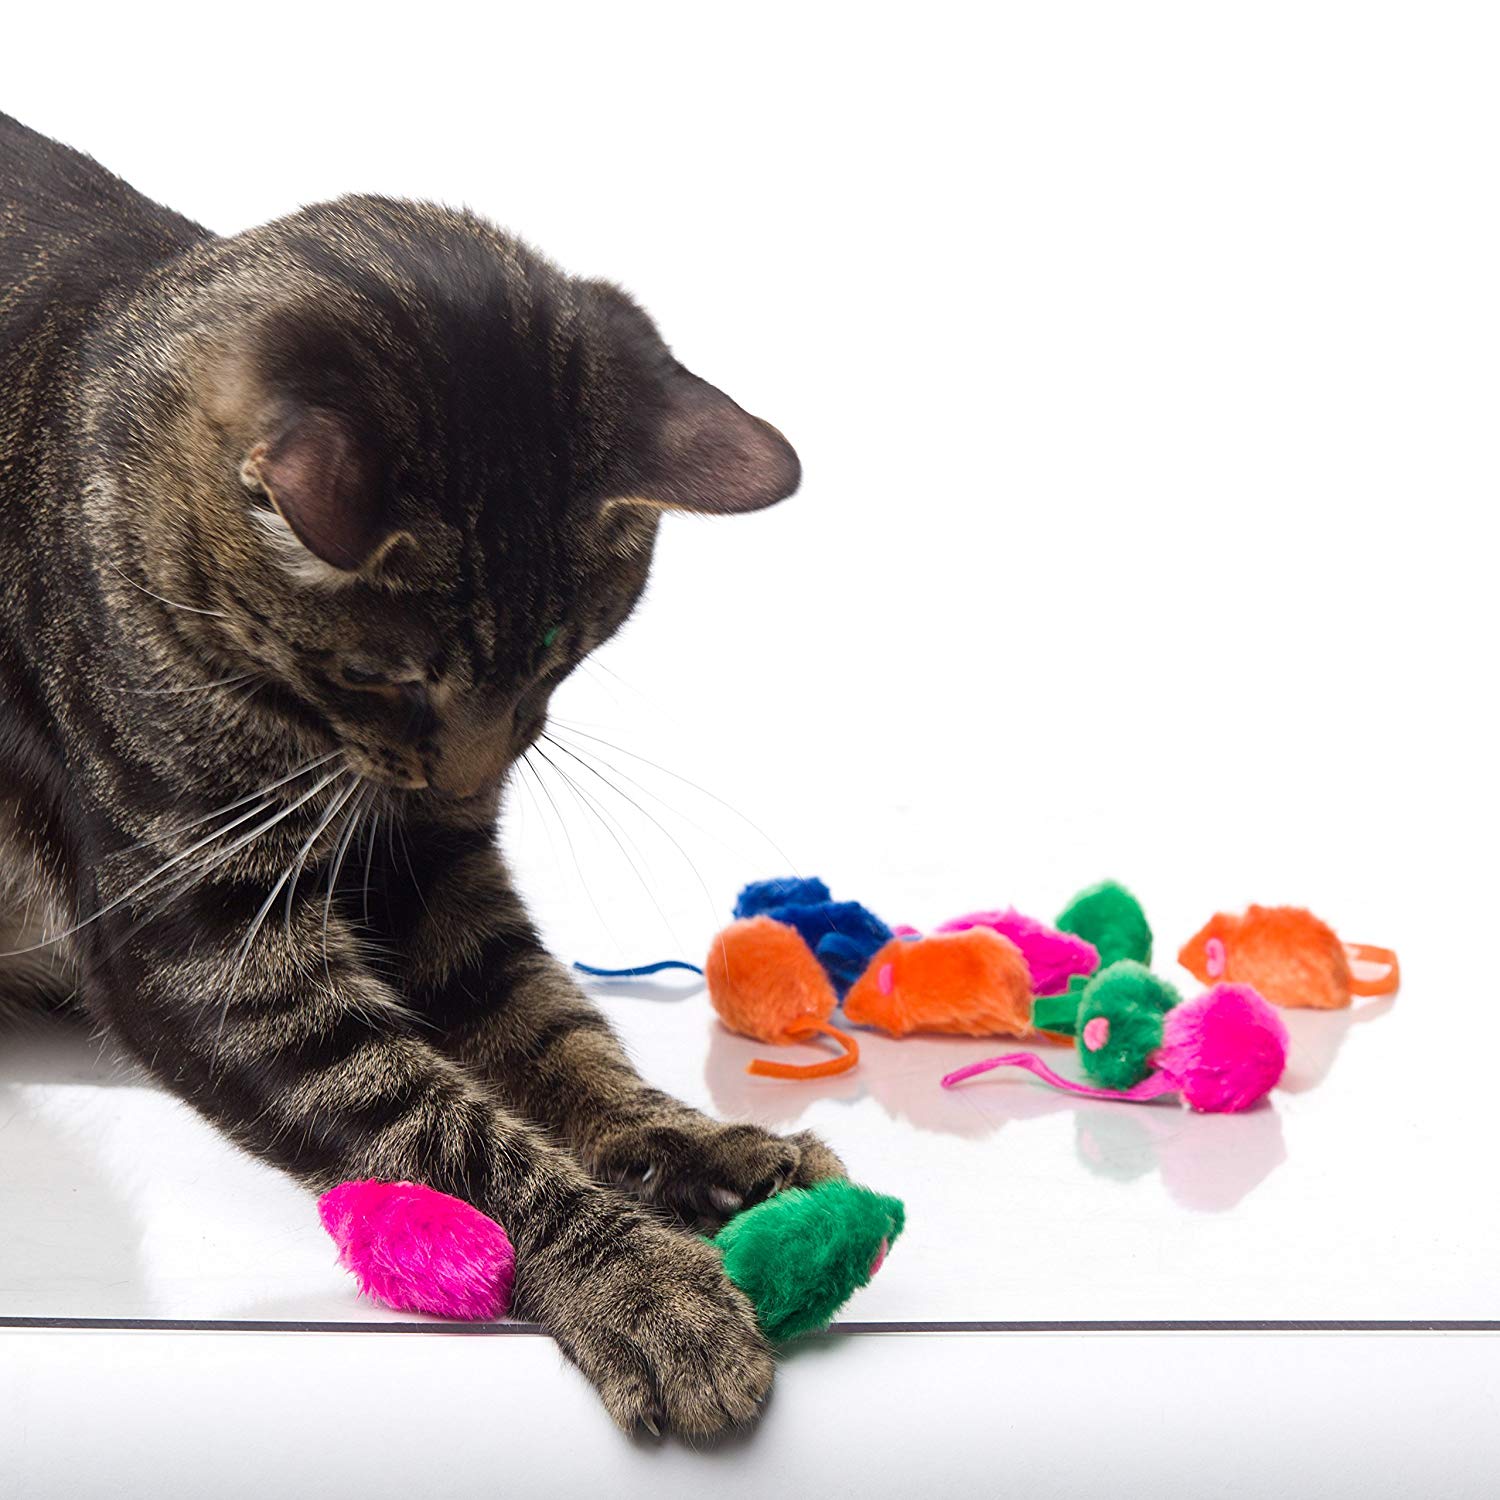 10 Best Cat Toys To Keep Your Kitties Entertained | Too Cute To Bear